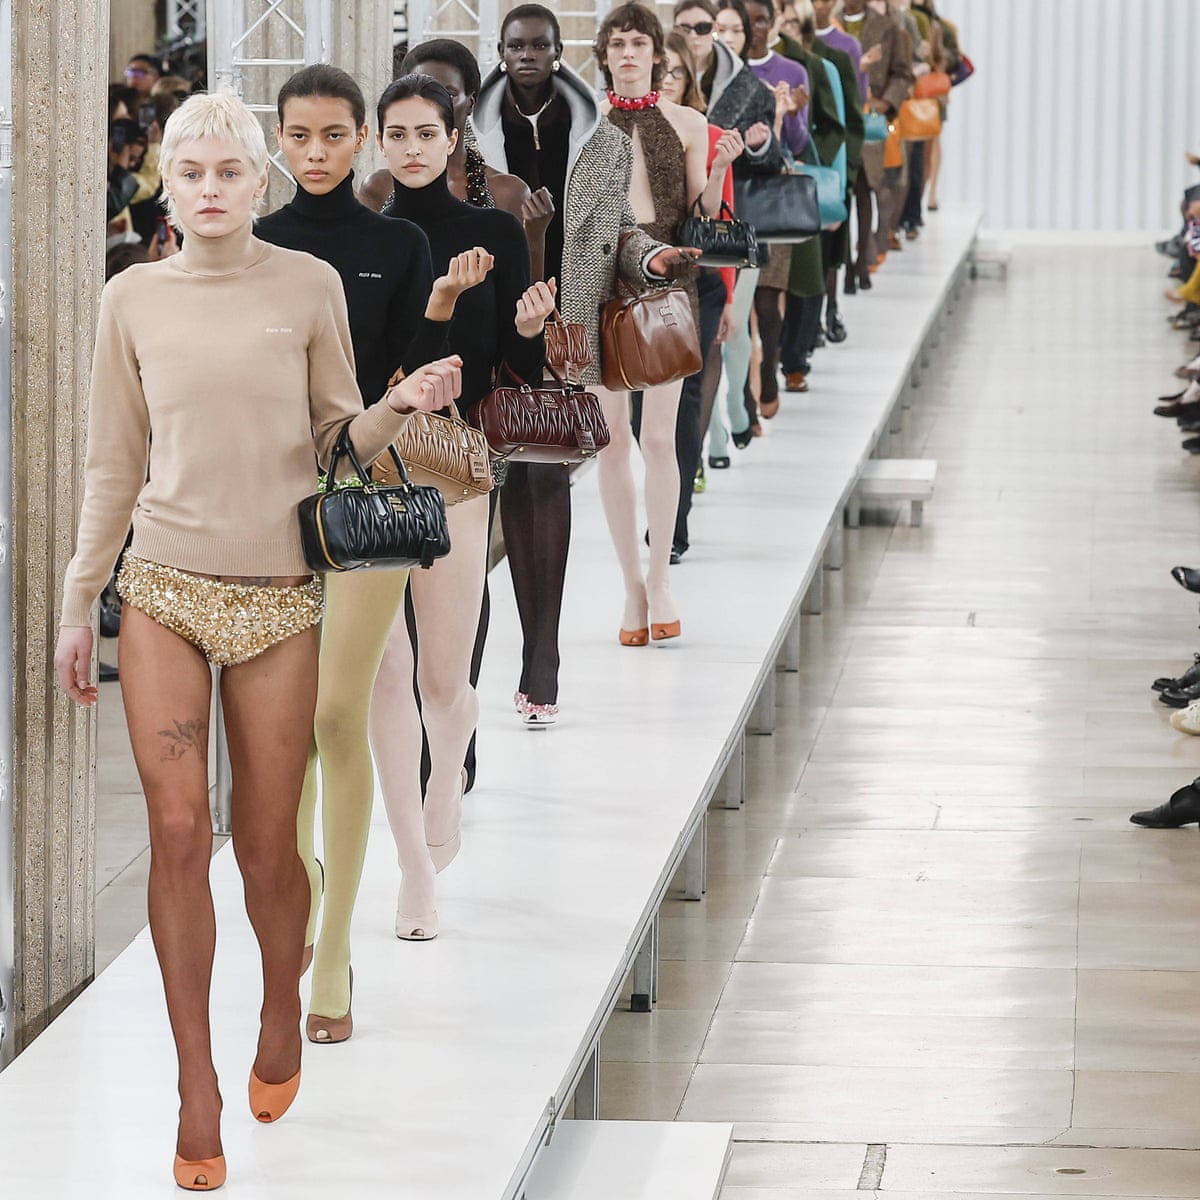 Fancy pants: How underwear as outerwear took over this winter's